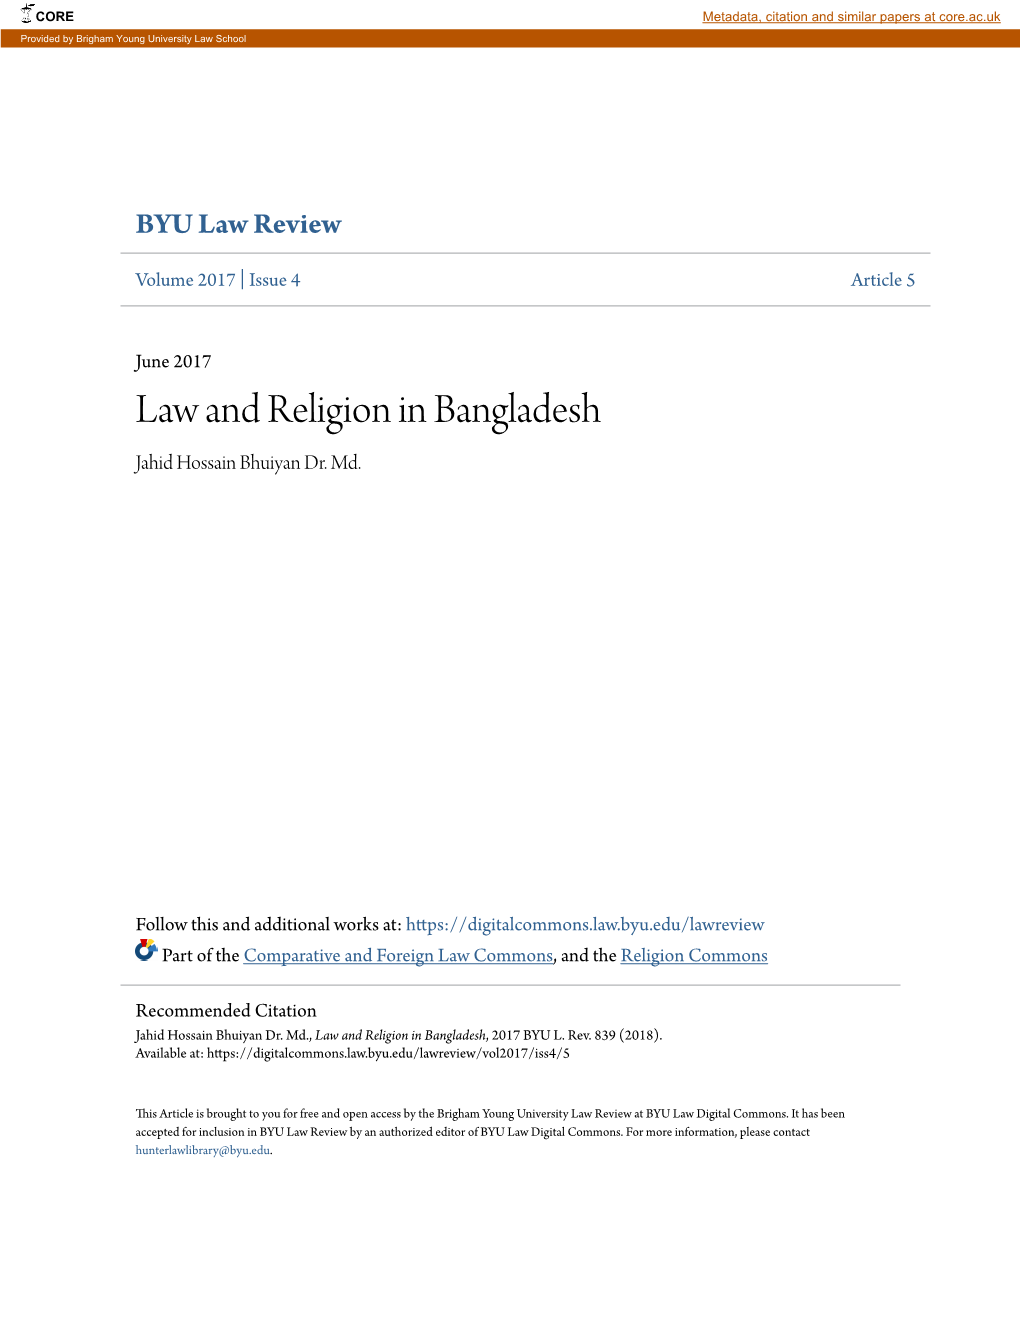 Law and Religion in Bangladesh Jahid Hossain Bhuiyan Dr